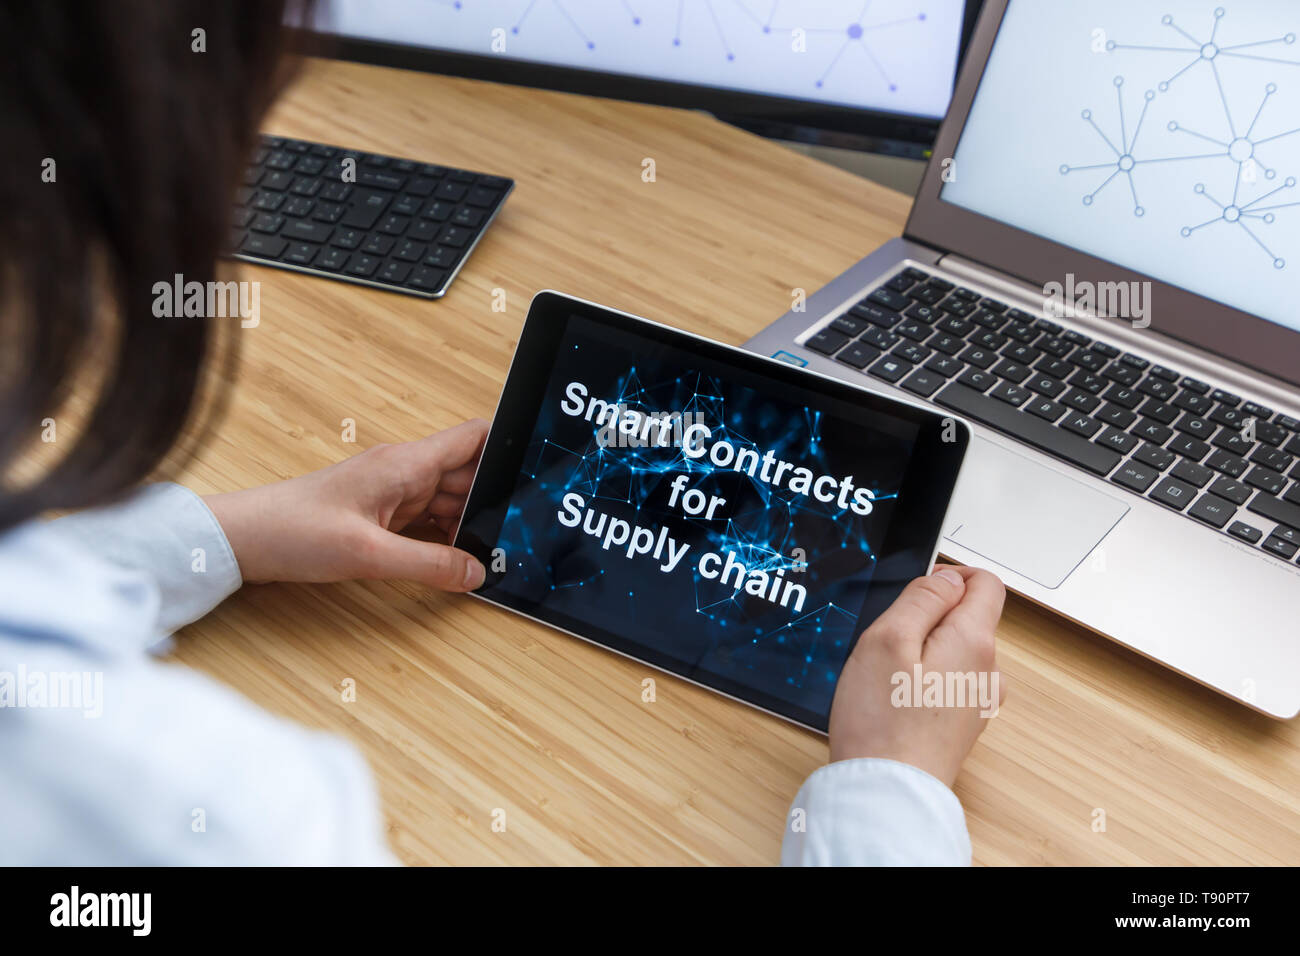 Business Female Using Smart Contracts For Supply chain. Illustration of Ethereum Blockchain on the Screen of Tablet, PC and Laptop. Stock Photo